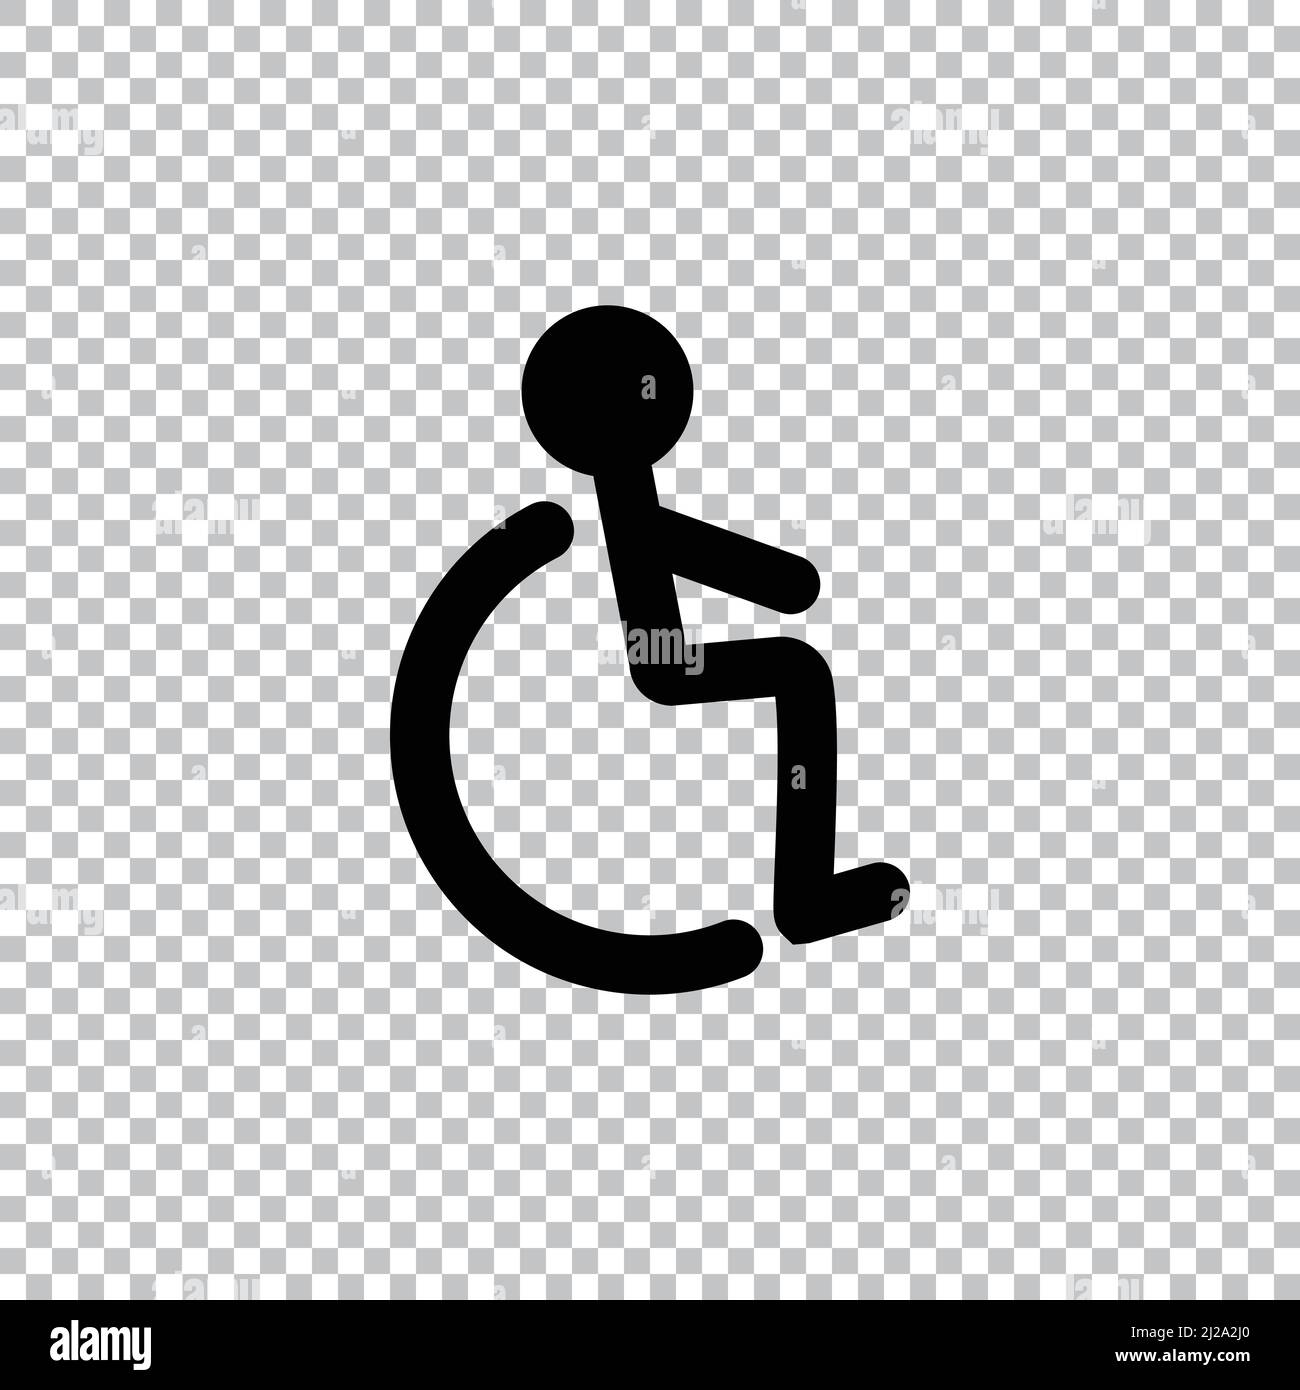 Silhouette icon of a wheelchair isolated on a transparent background. Editable vector. Stock Vector